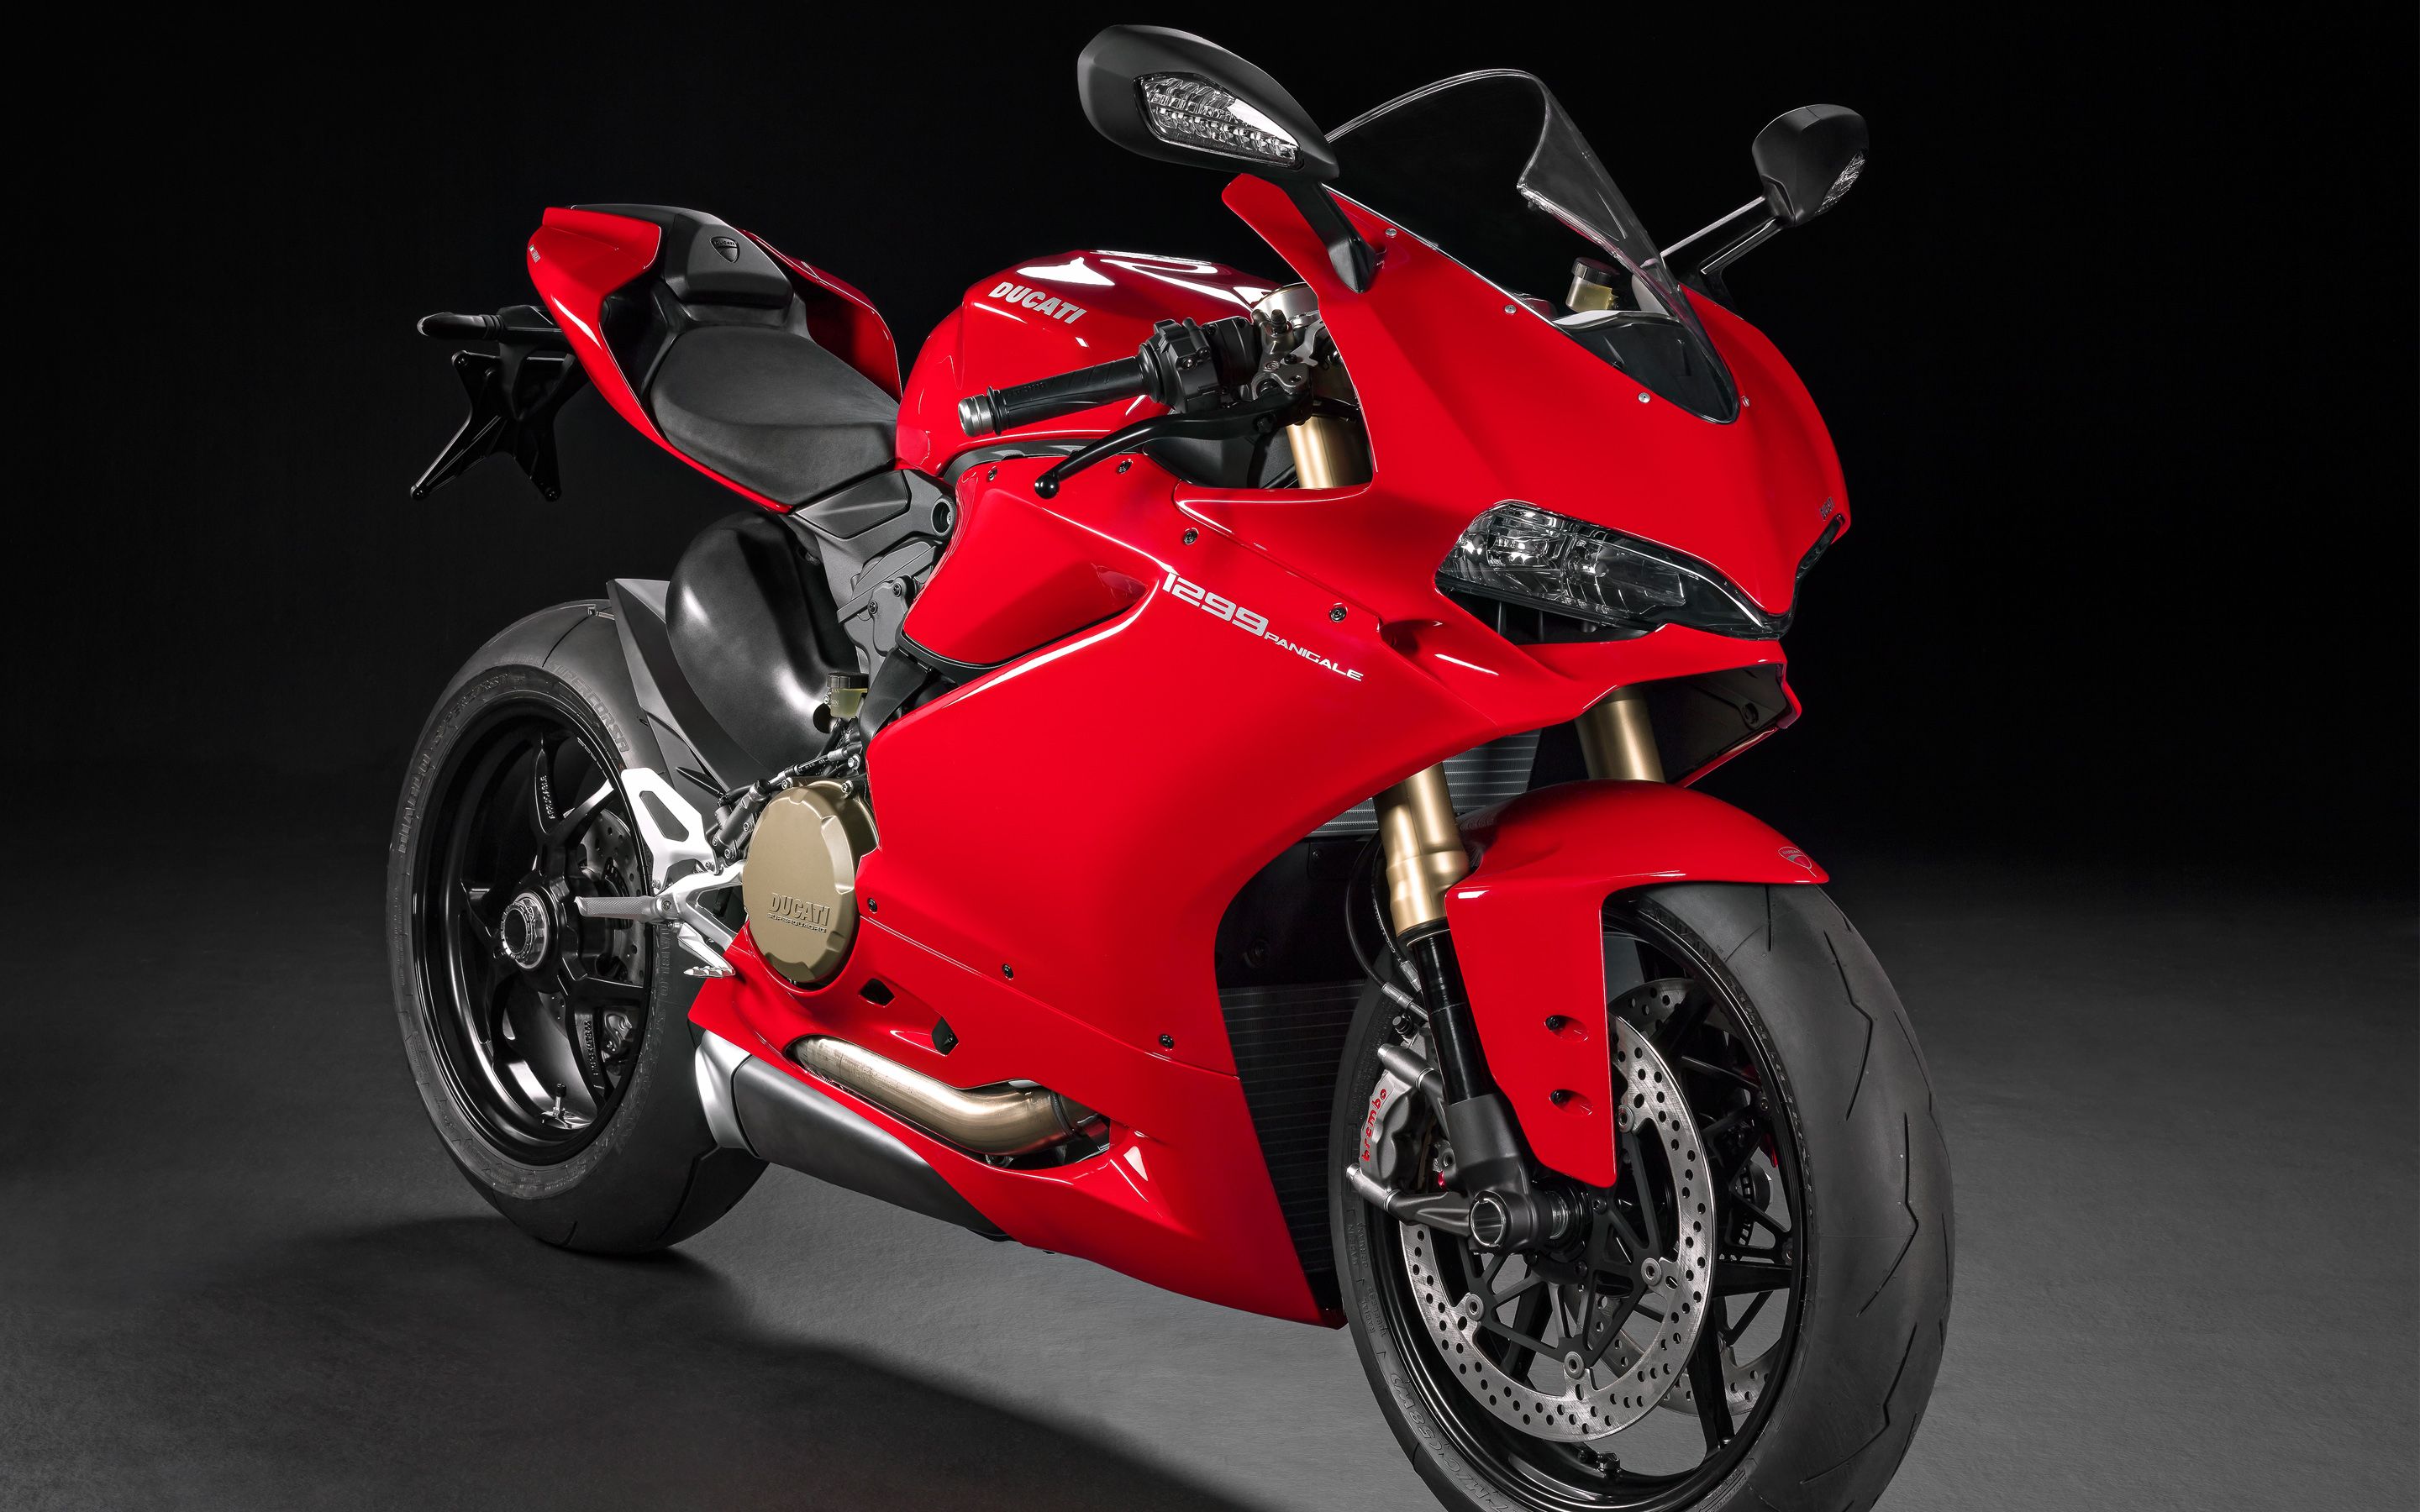 2015 Ducati Superbike 1299 Panigale Wallpapers | HD Wallpapers